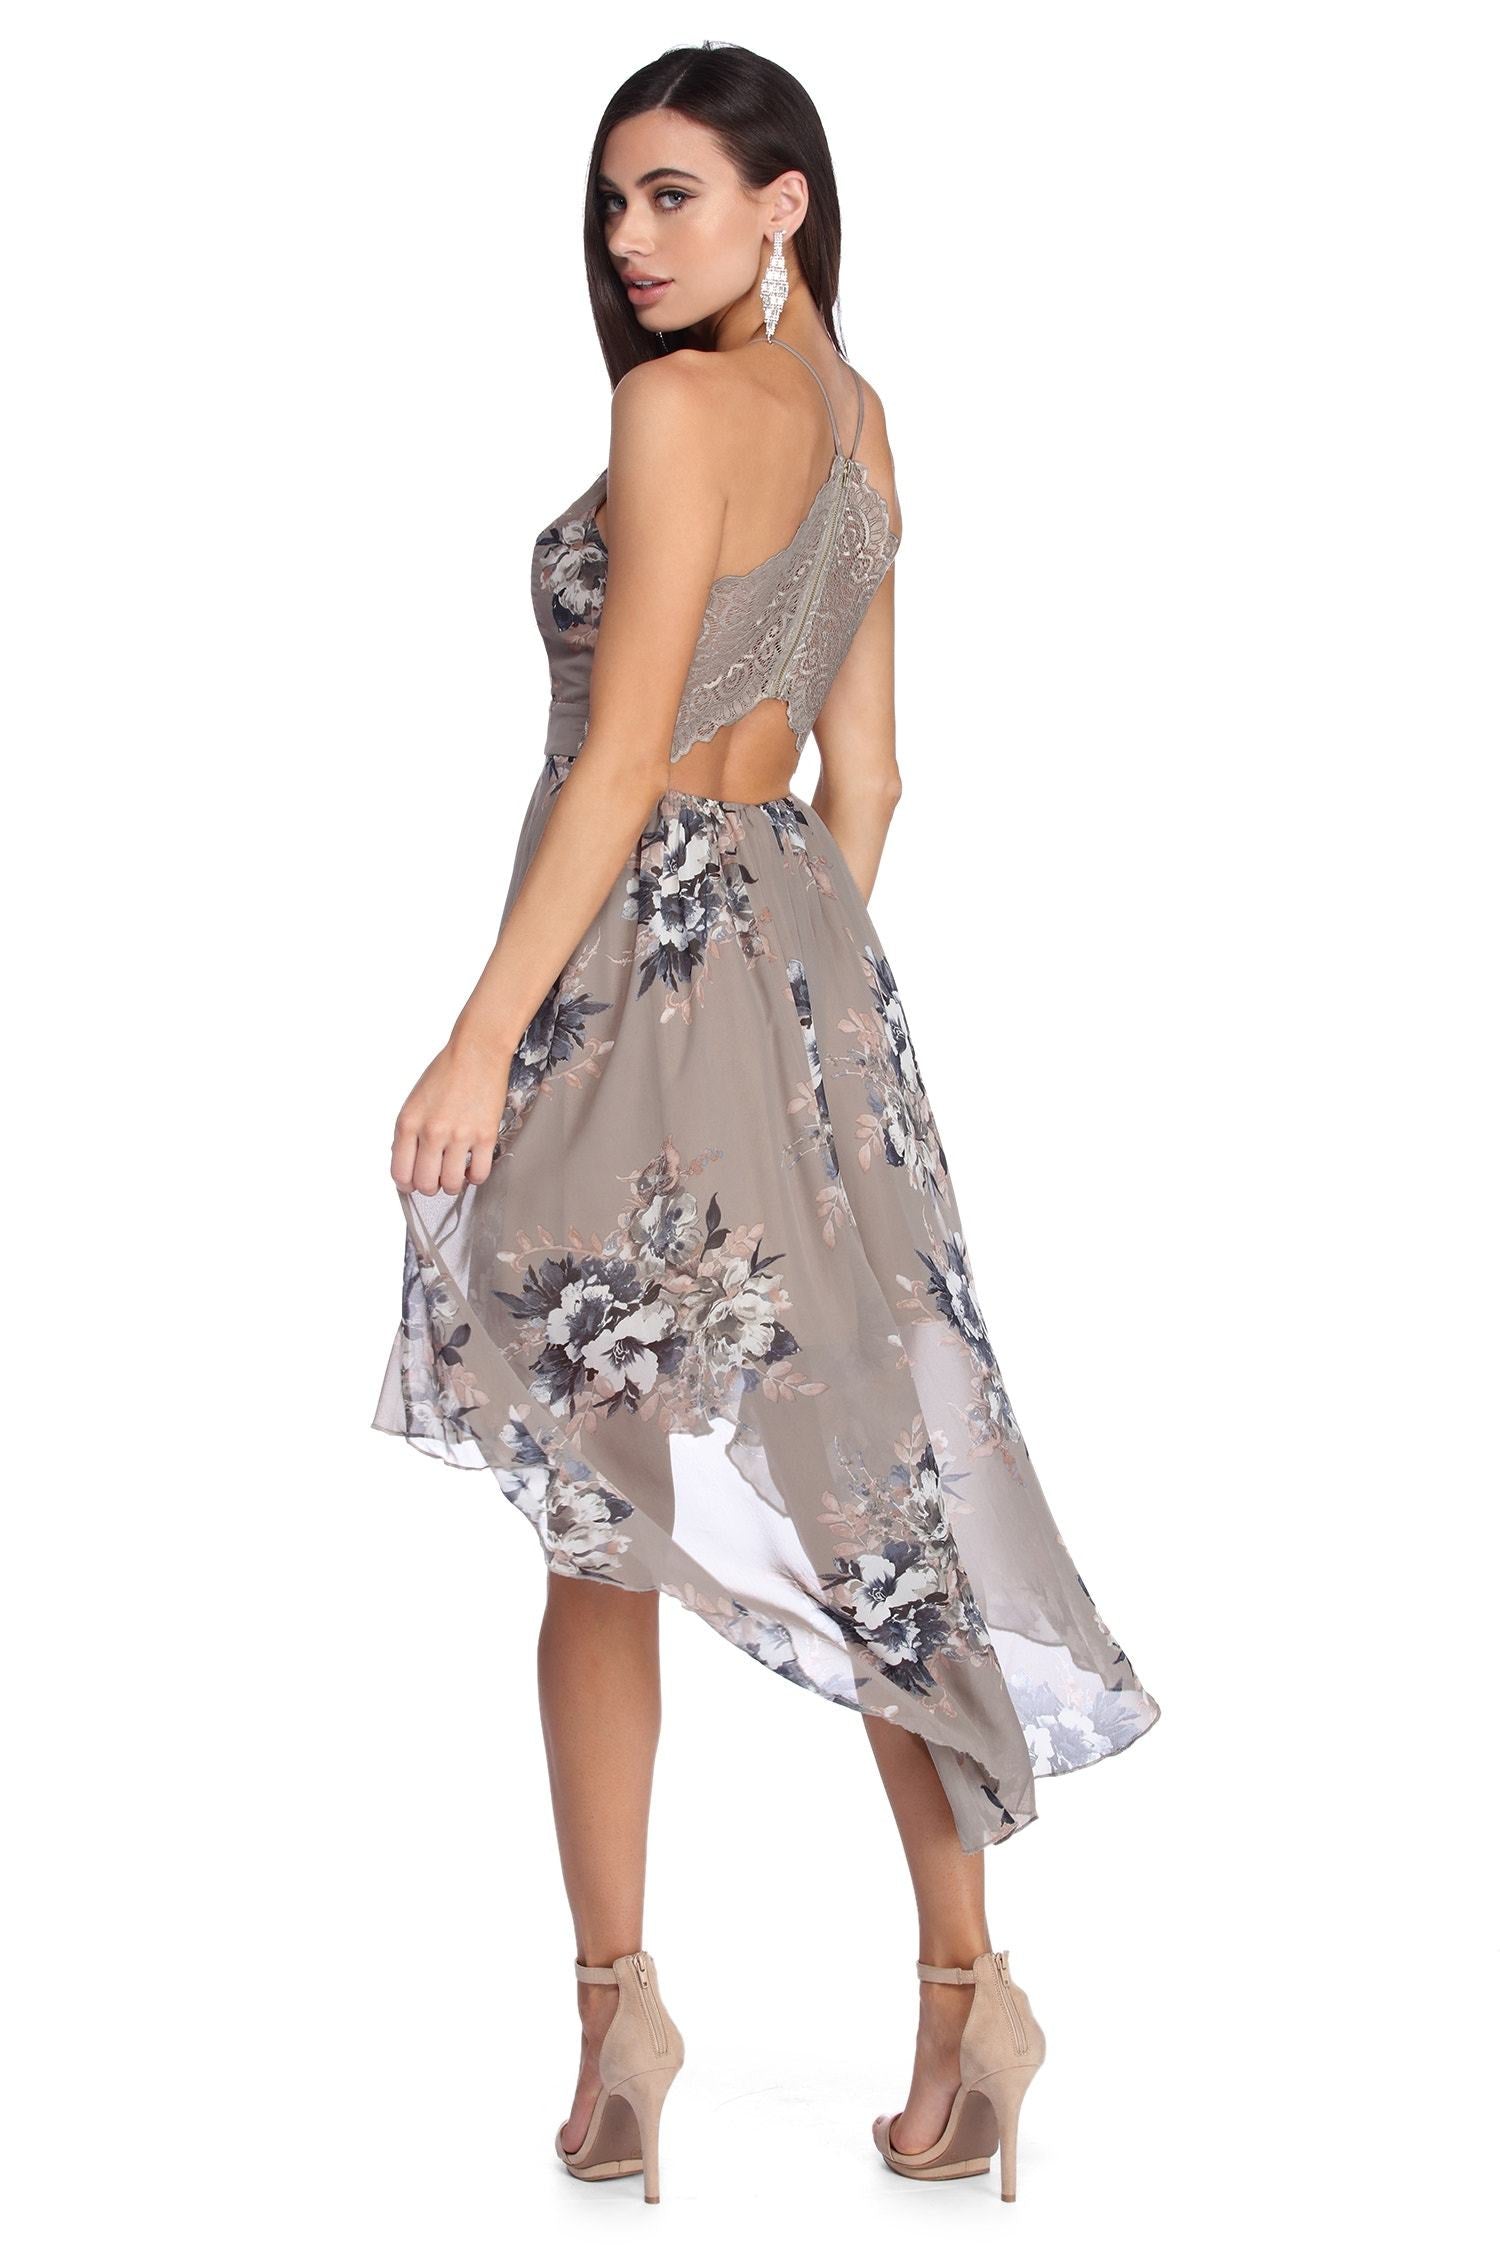 Chiffon Dreams Floral Skater Dress - Lady Occasions